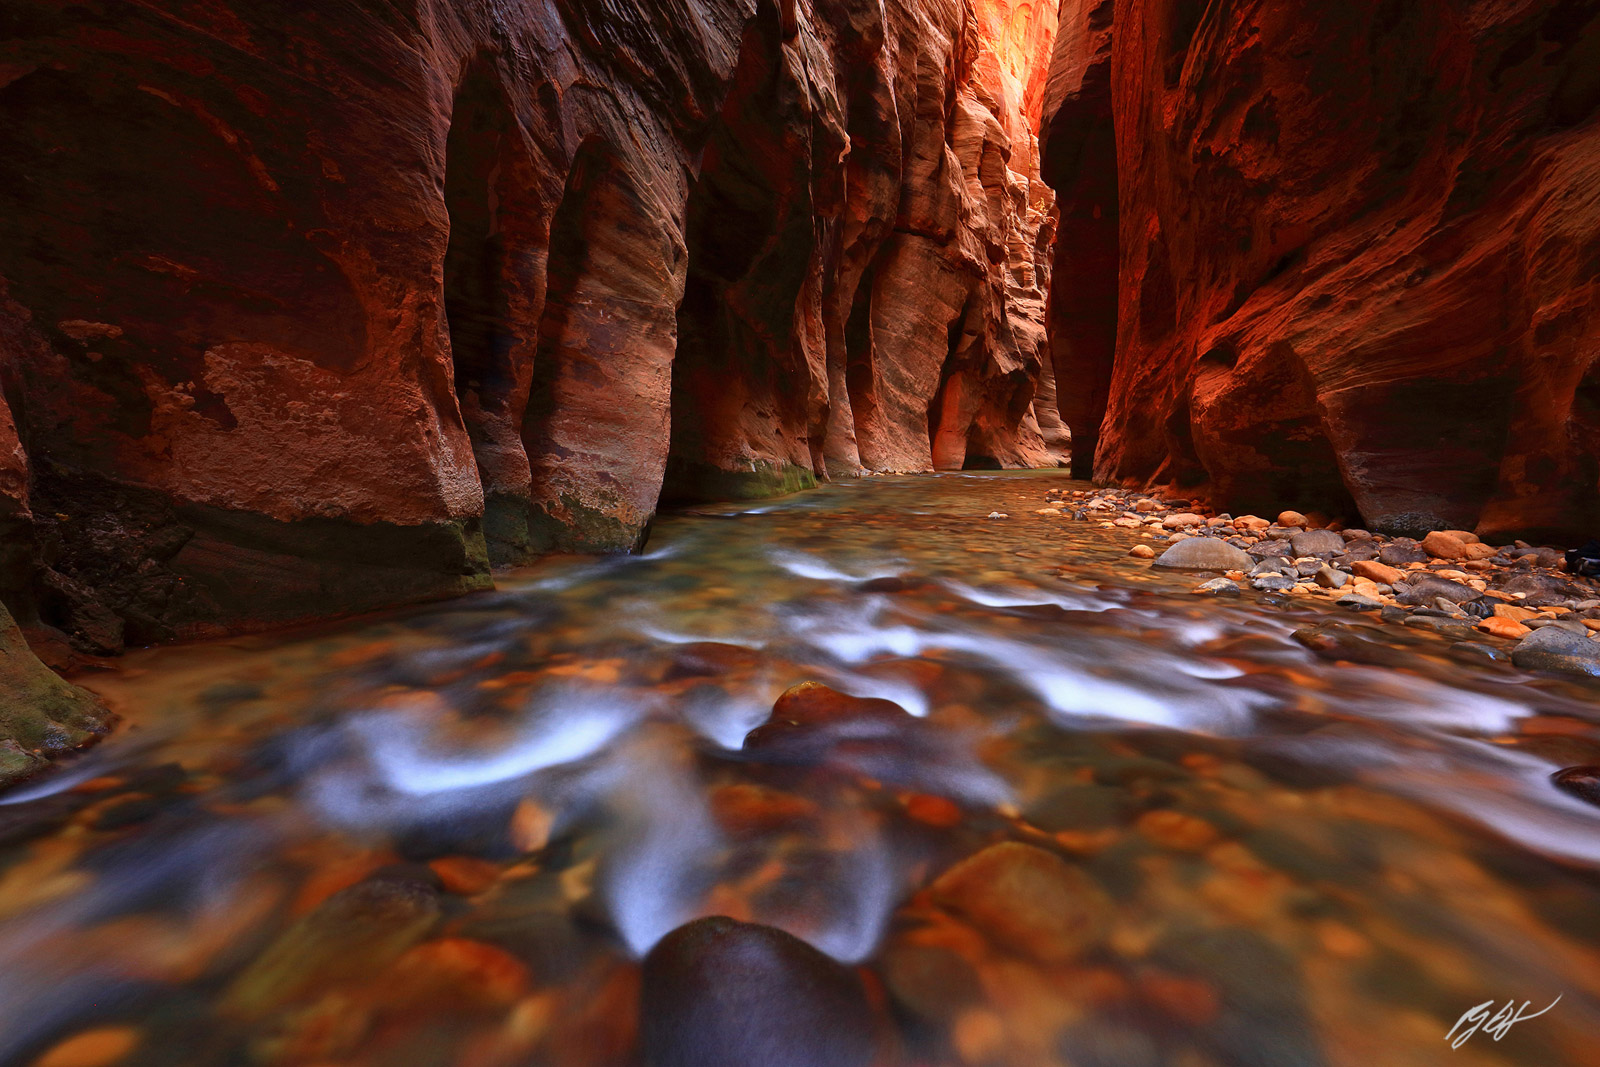 The Virgin River Running Through the Narrows in Zion National Park in Utah